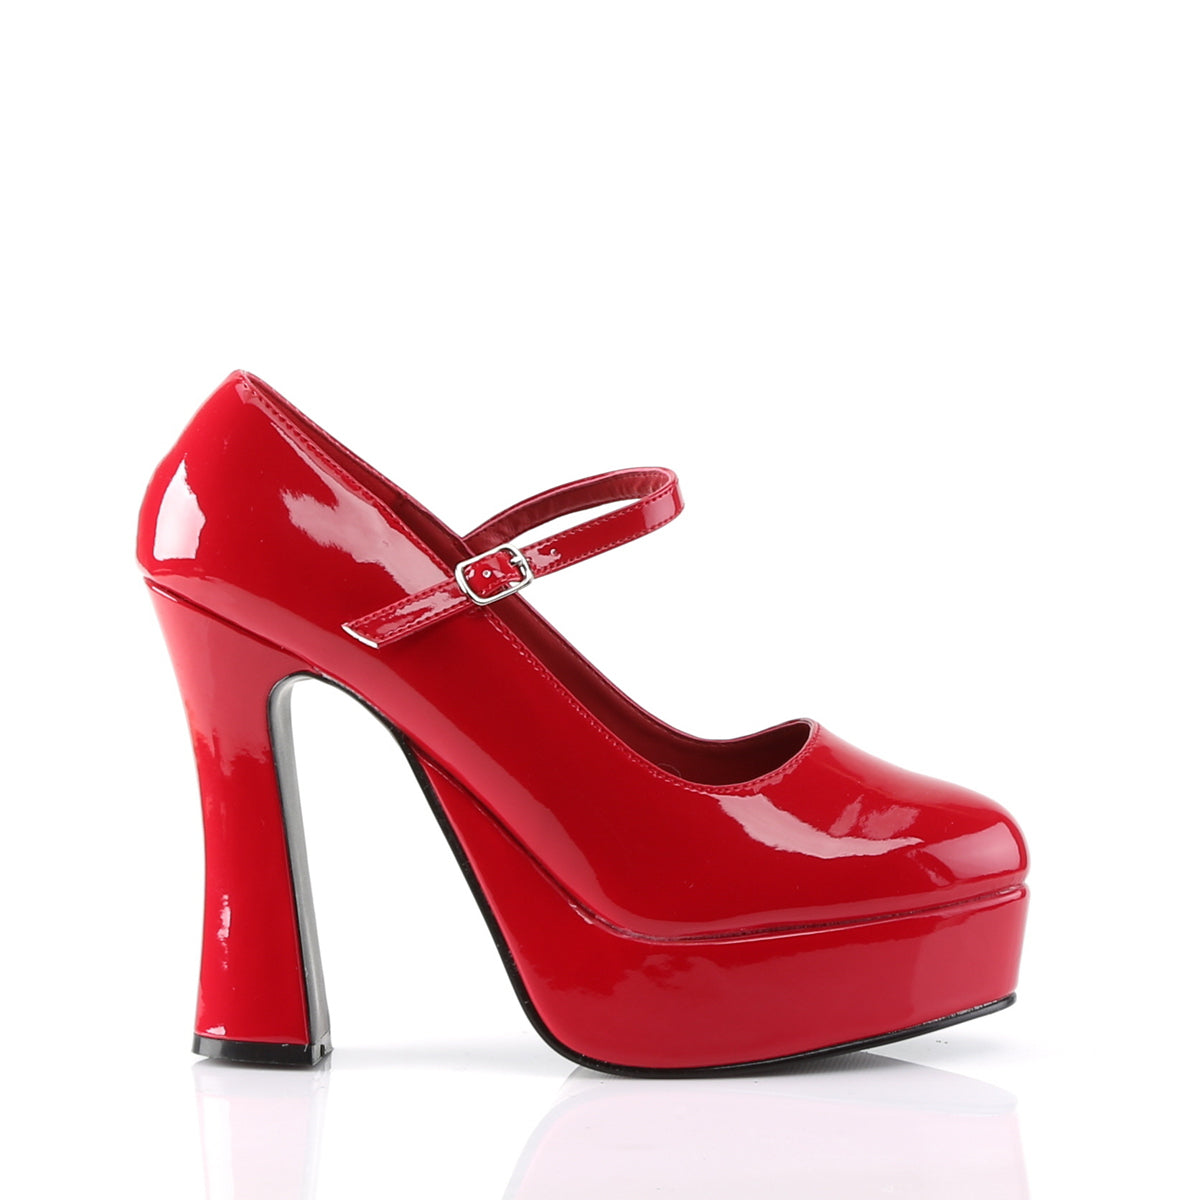 DOLLY-50 Red Patent Mary Janes Demonia